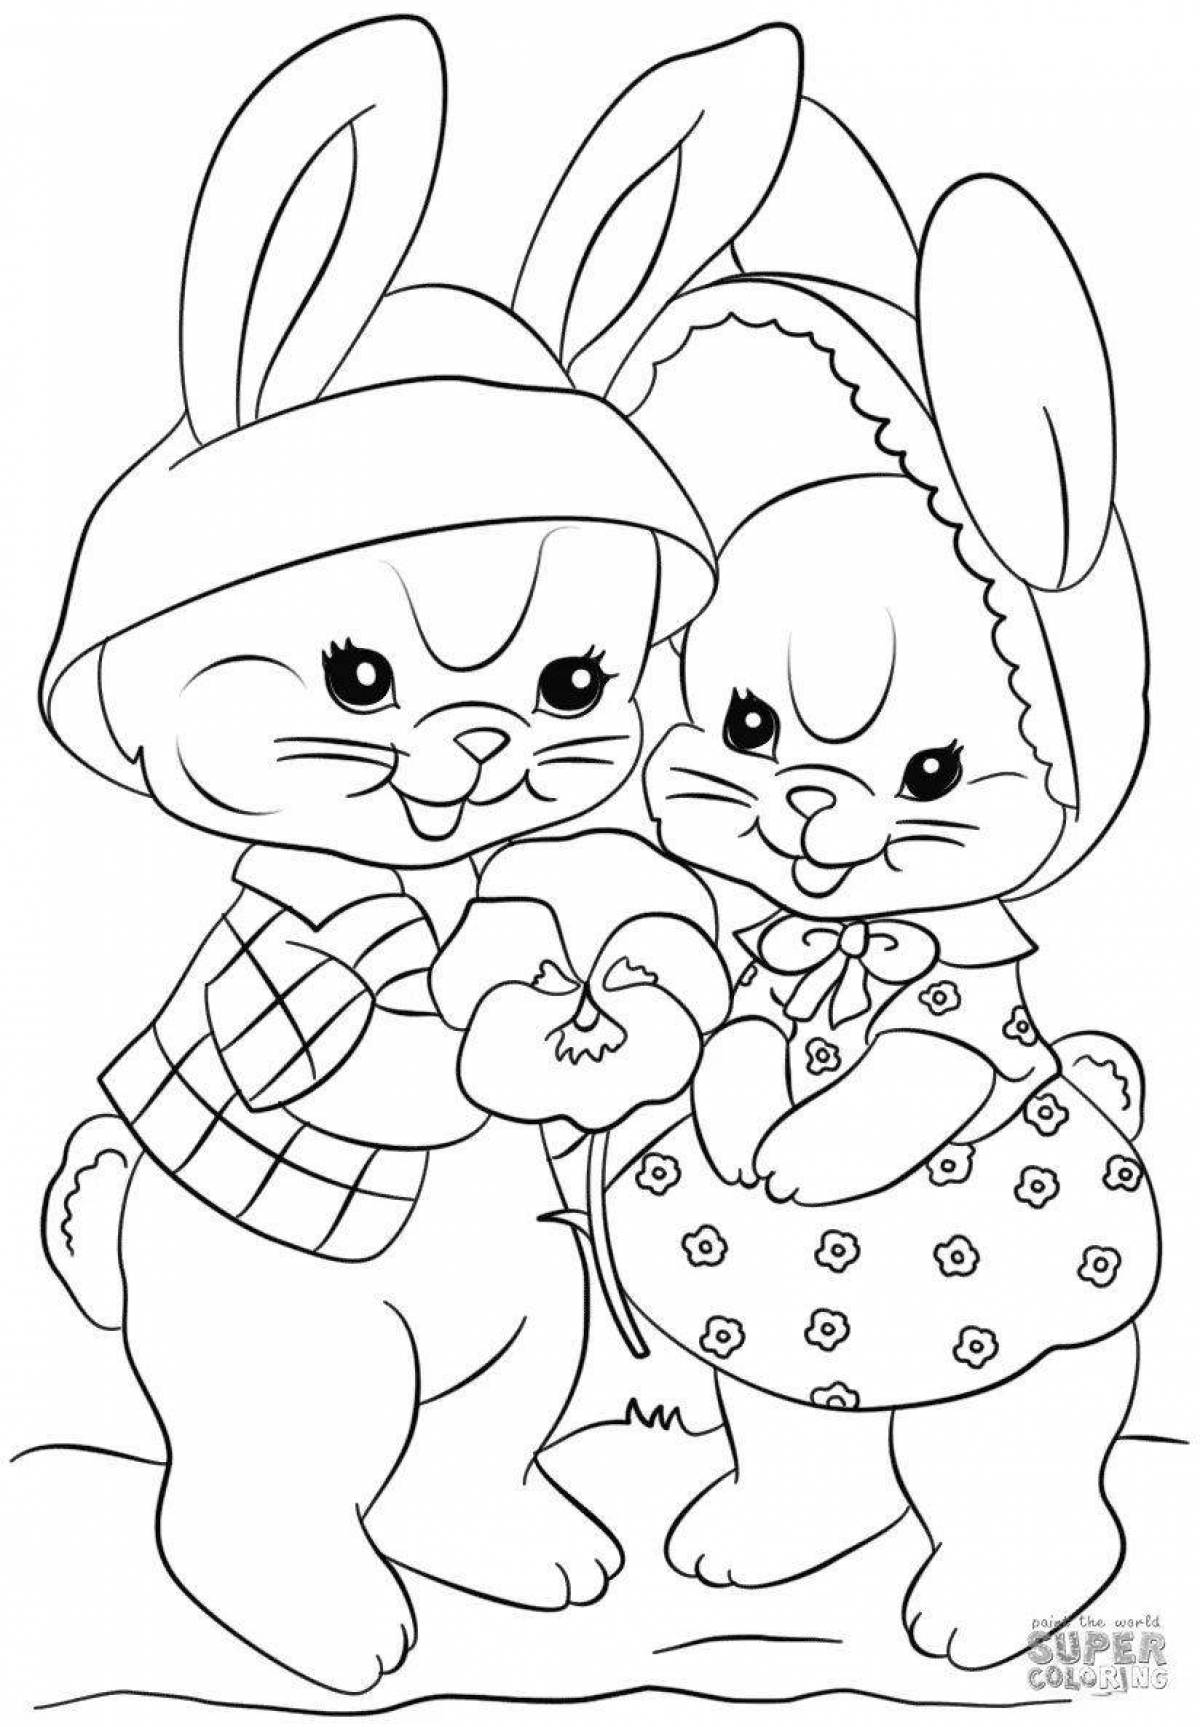 Cat and bunny #18